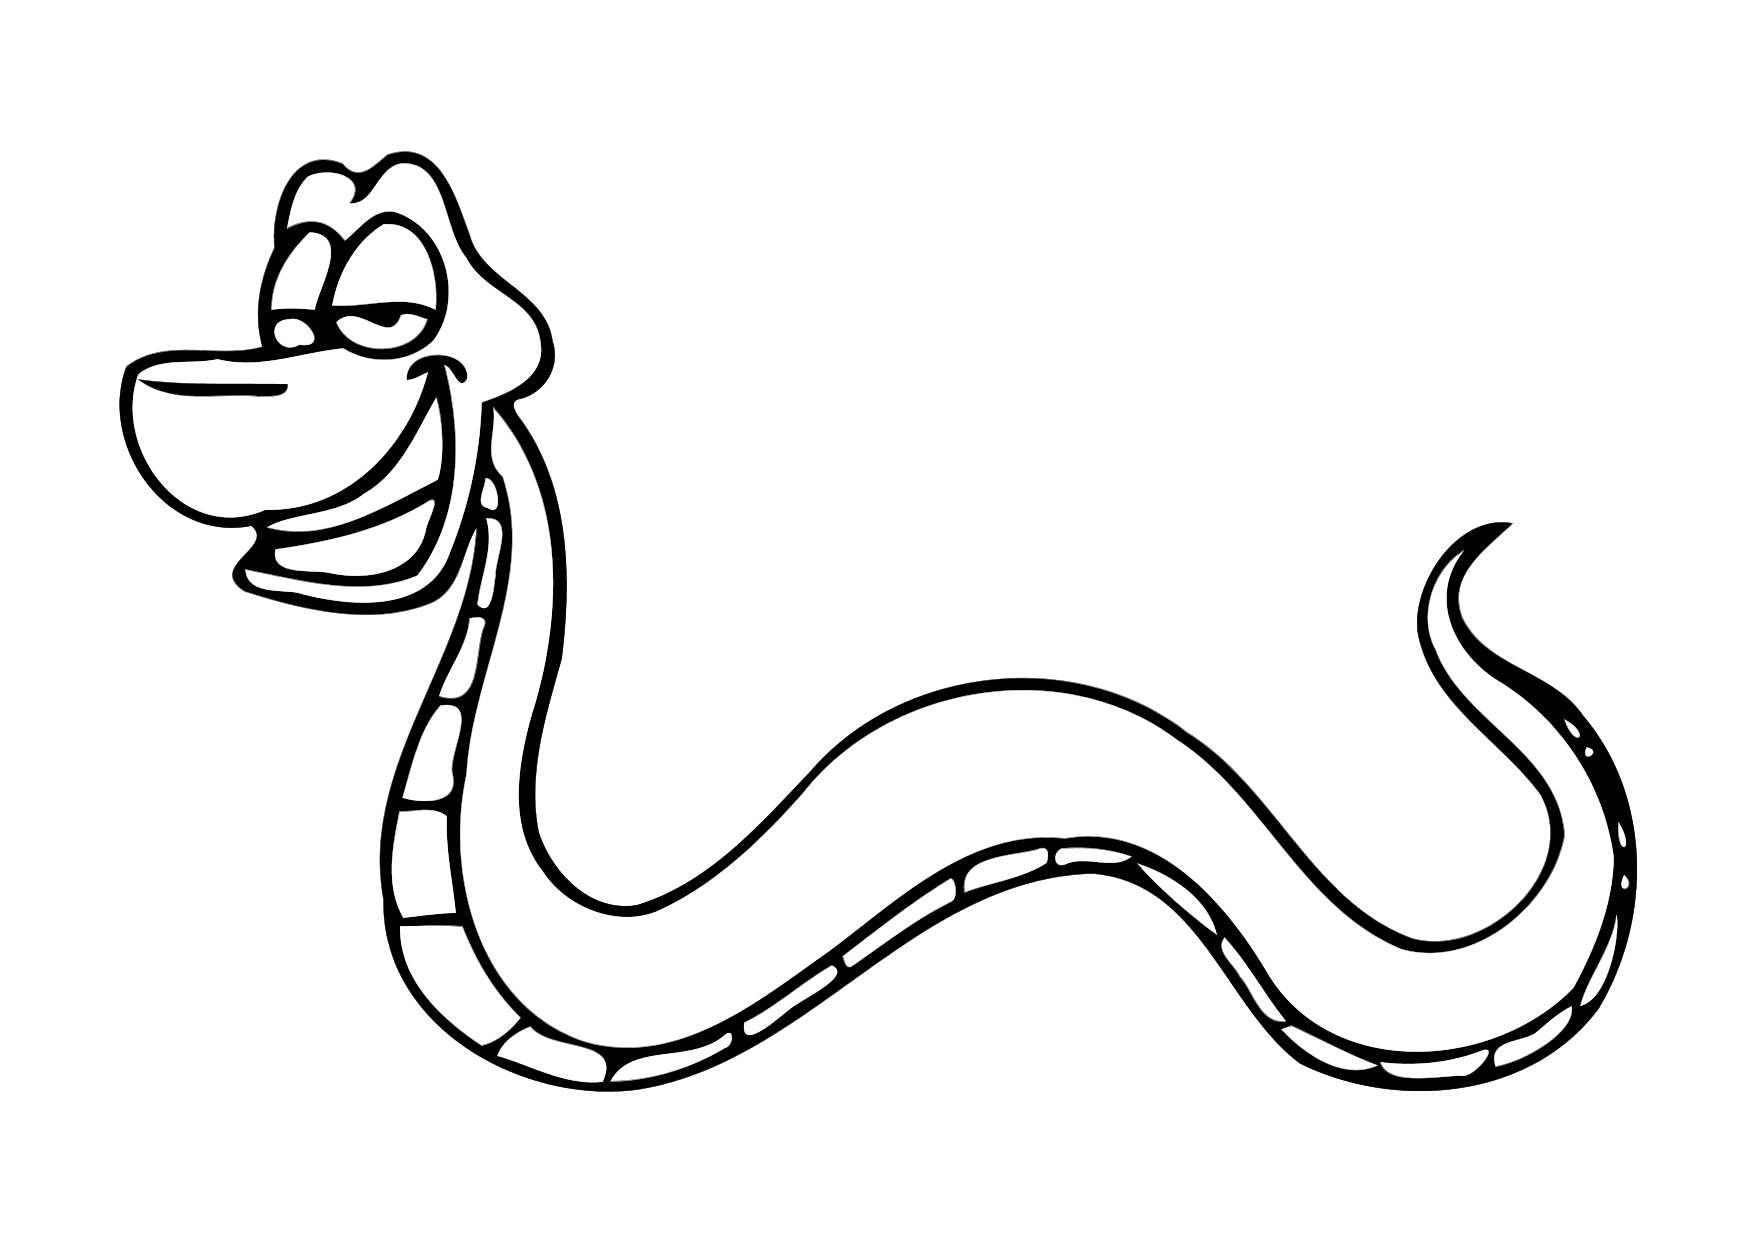 Snake Colouring Picture - ClipArt Best